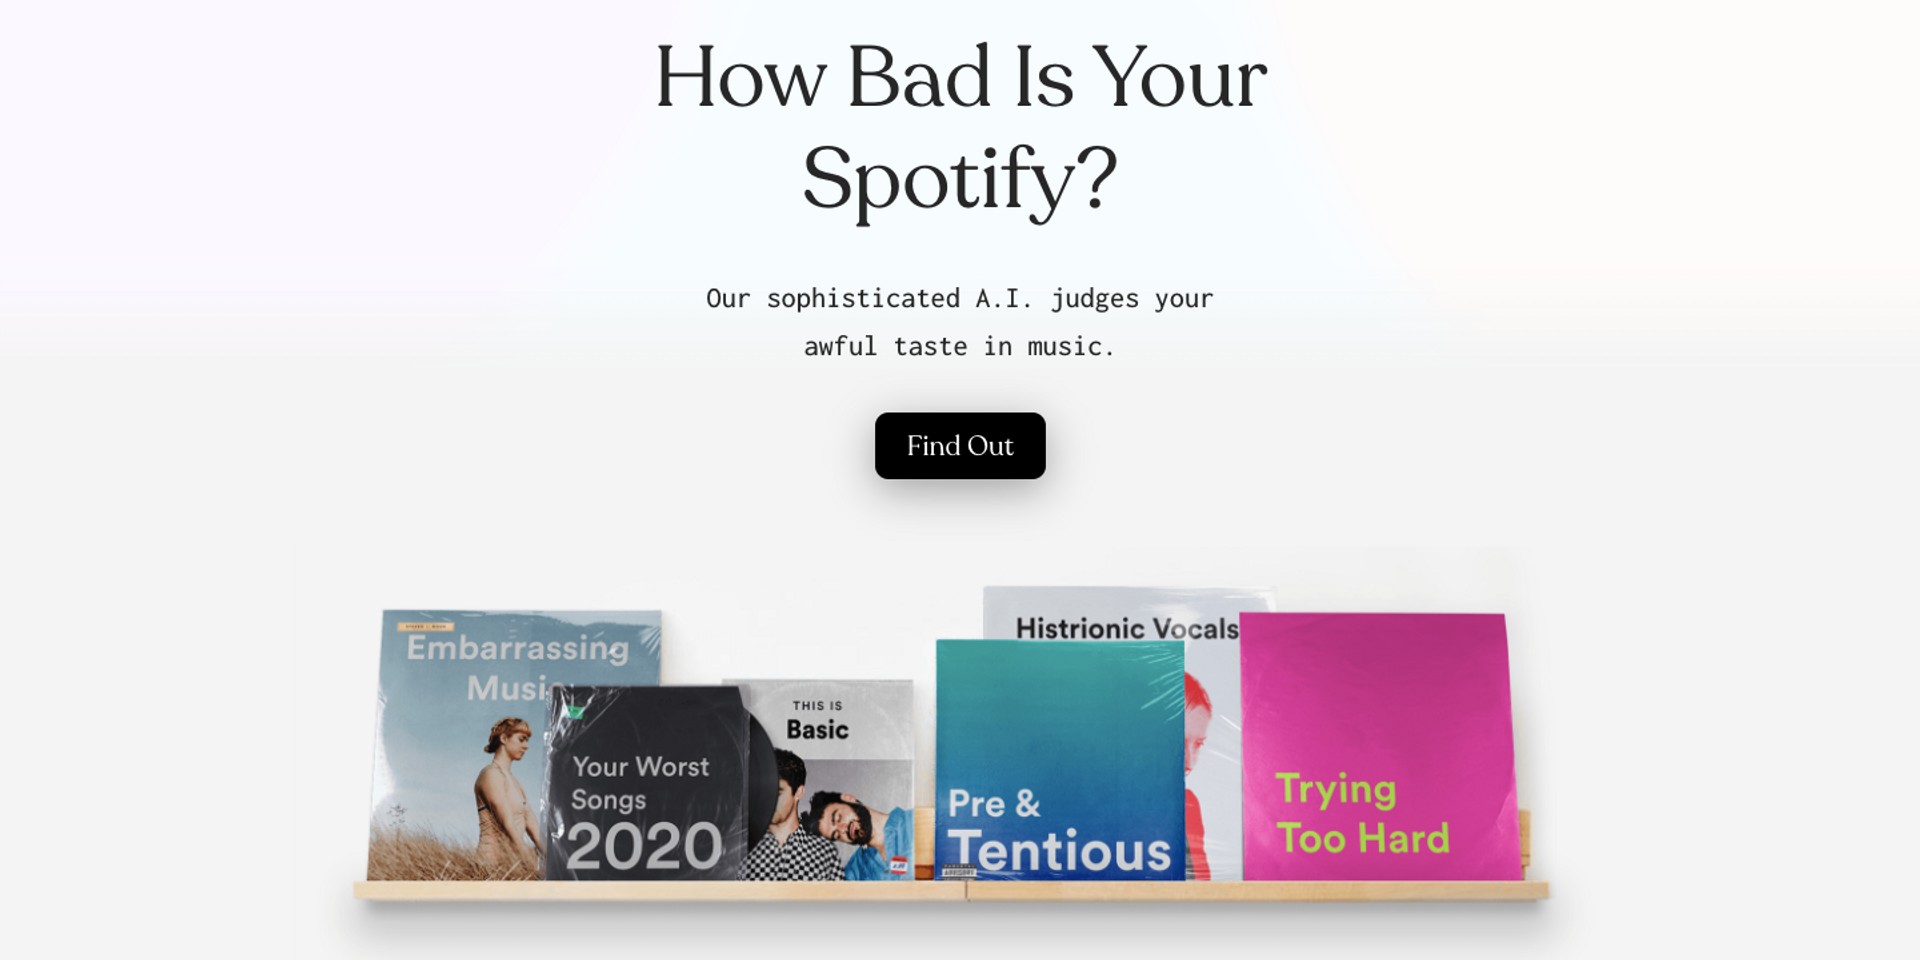 Find out how bad your music taste is with 'Judge My Spotify'